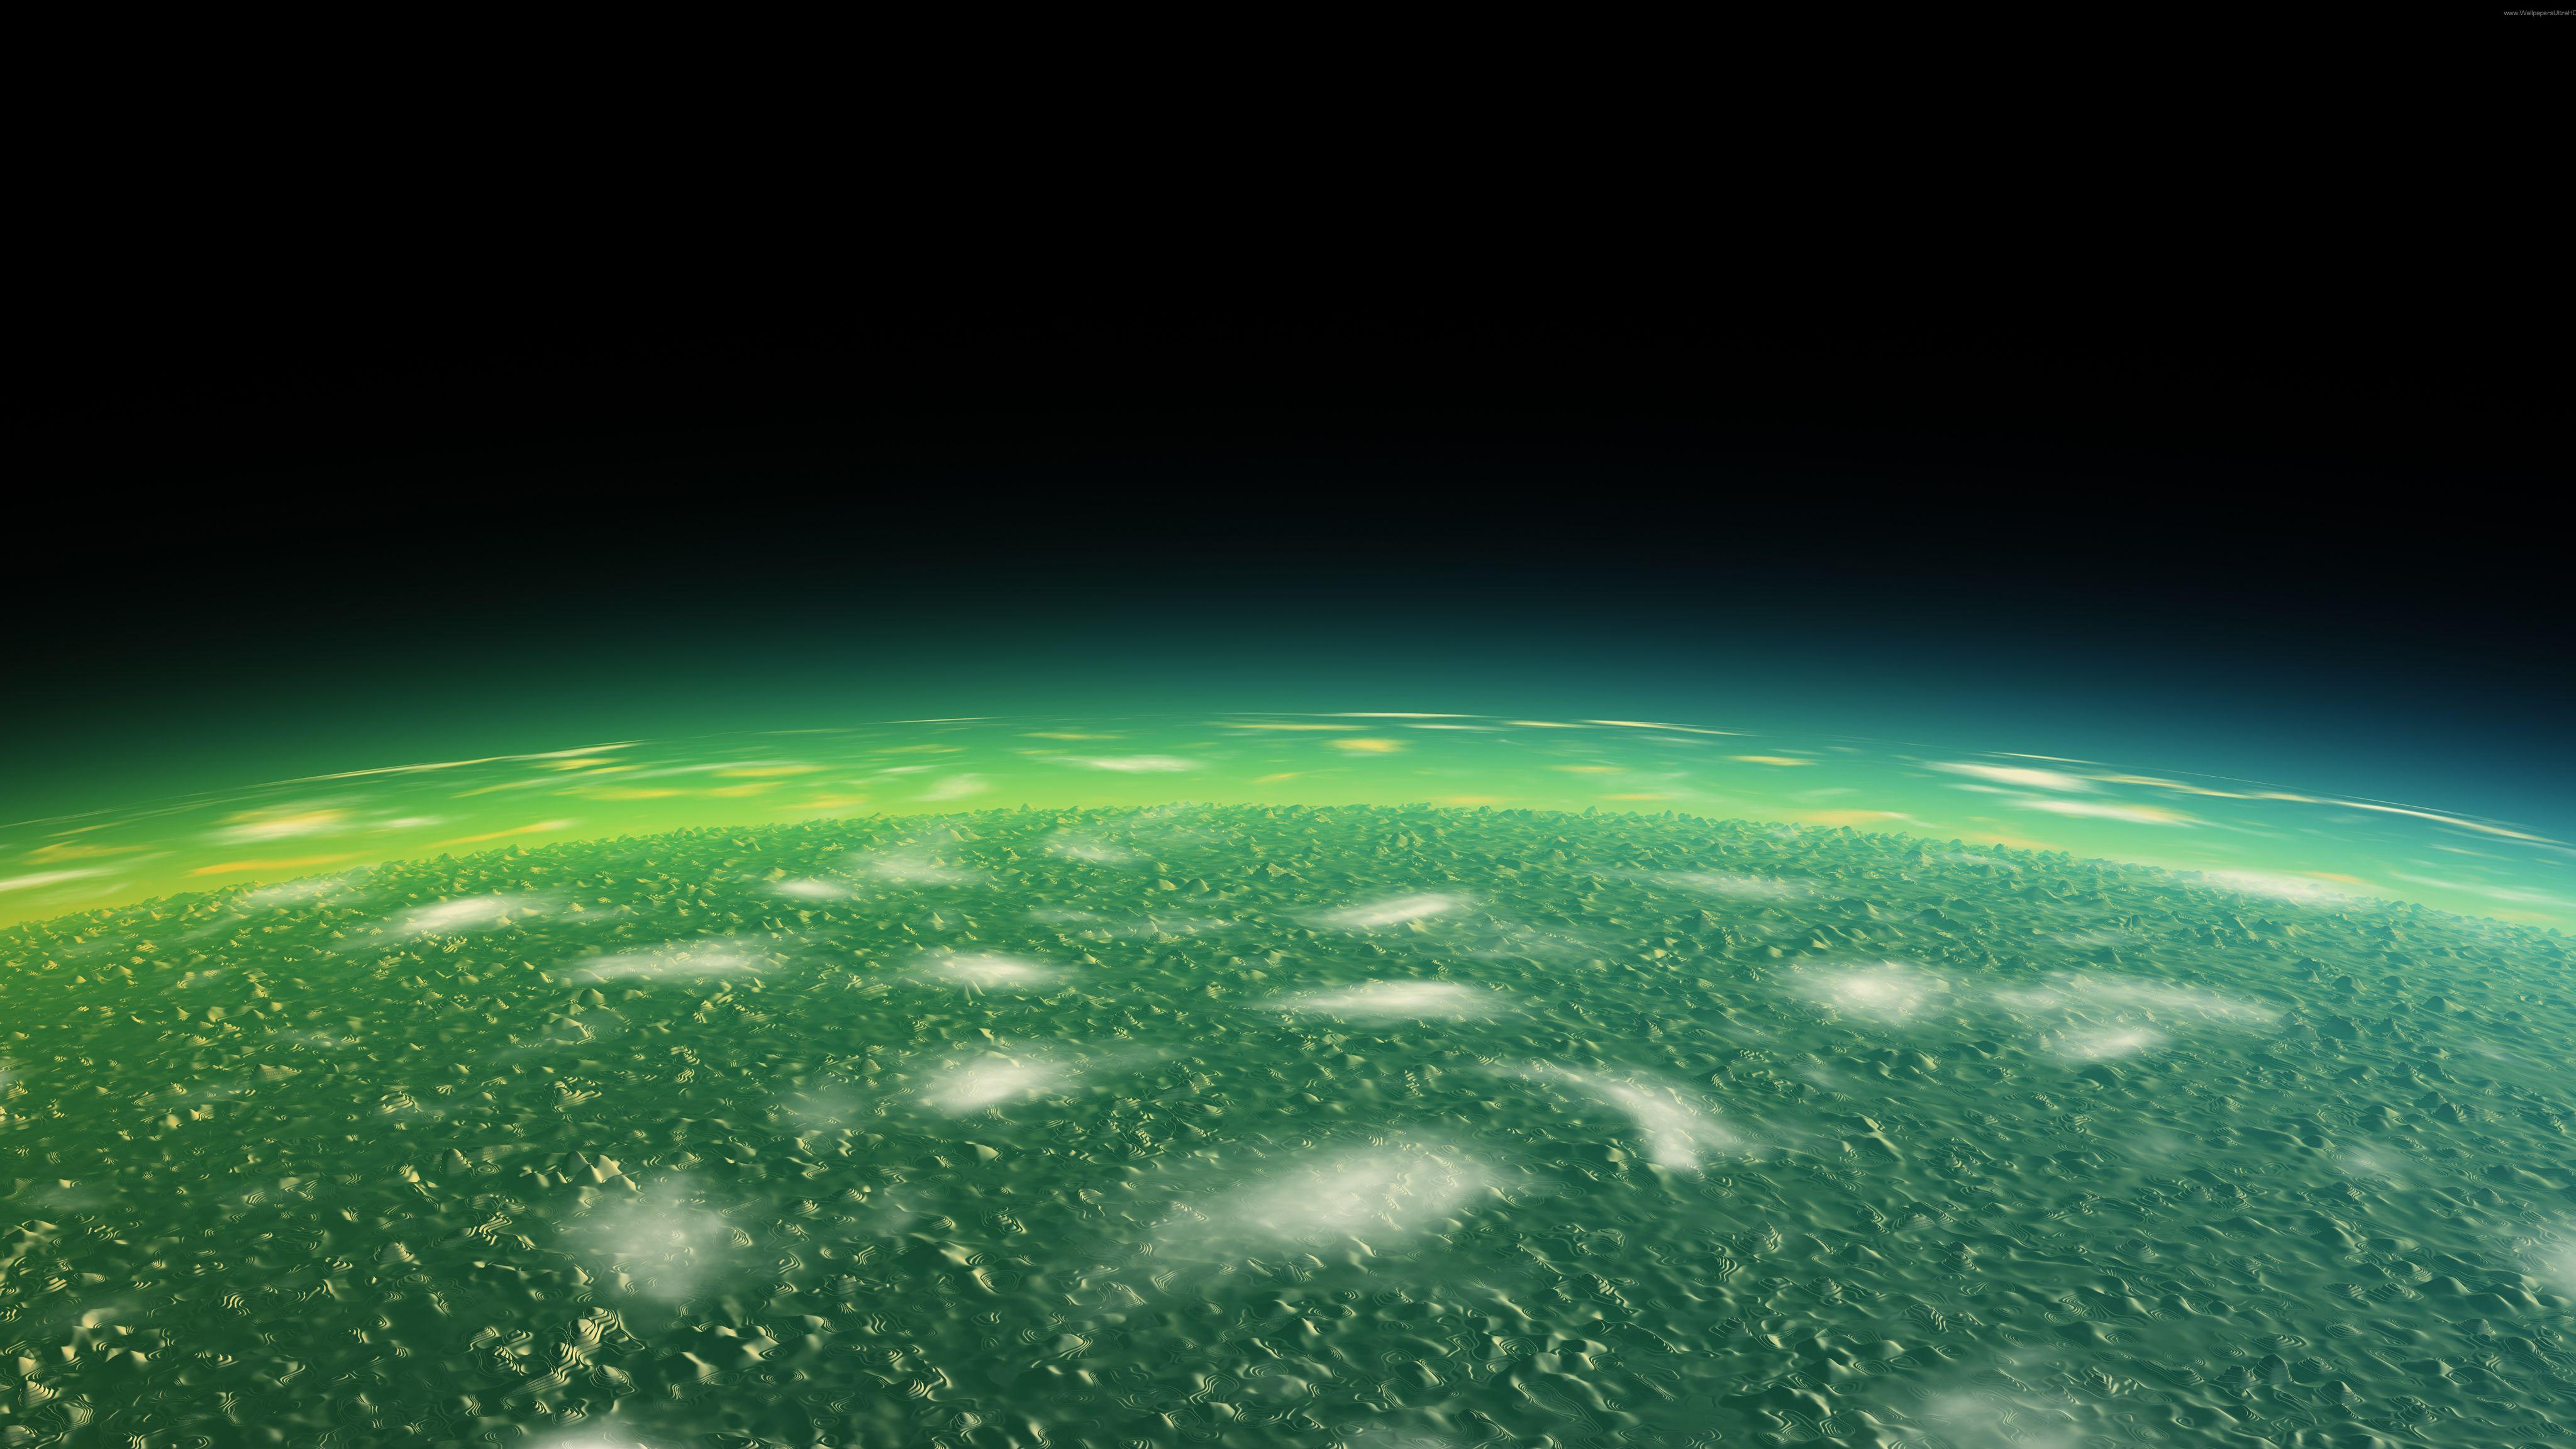 4096x2304 Top of the Planet Windows 10 Wallpaper - Space 4K 4096x2304